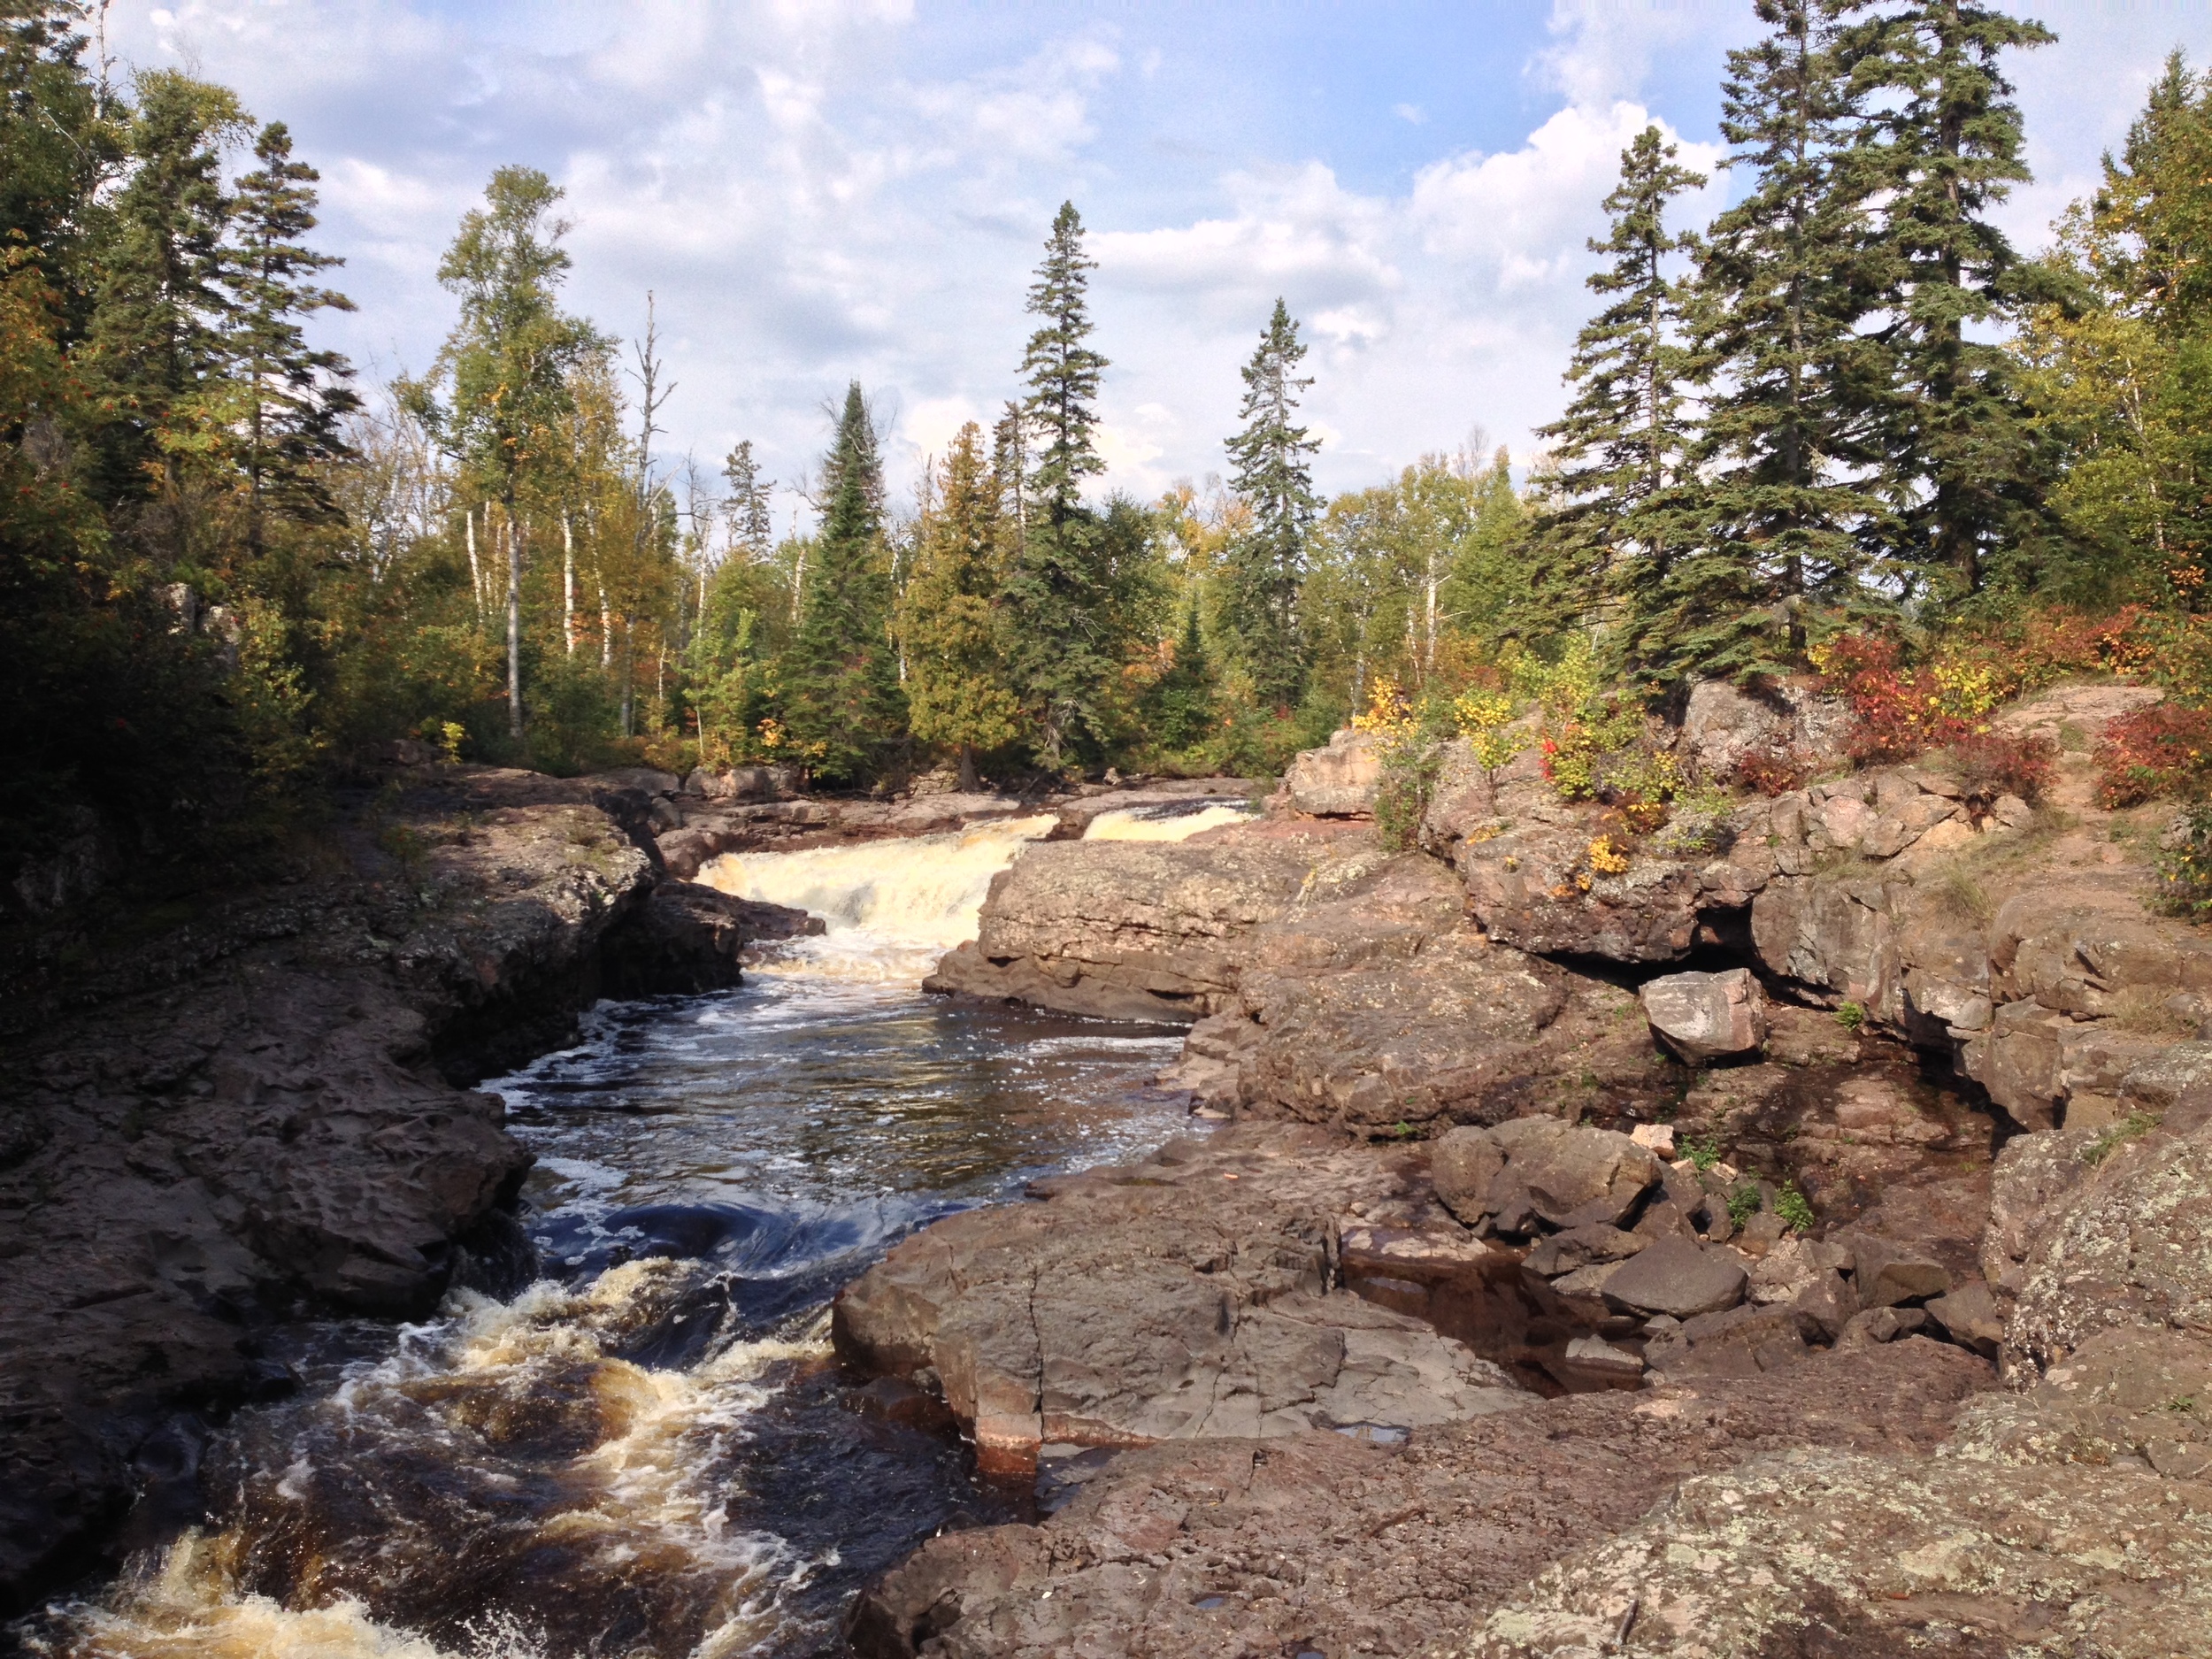 Wilderness of Temperance River State Park